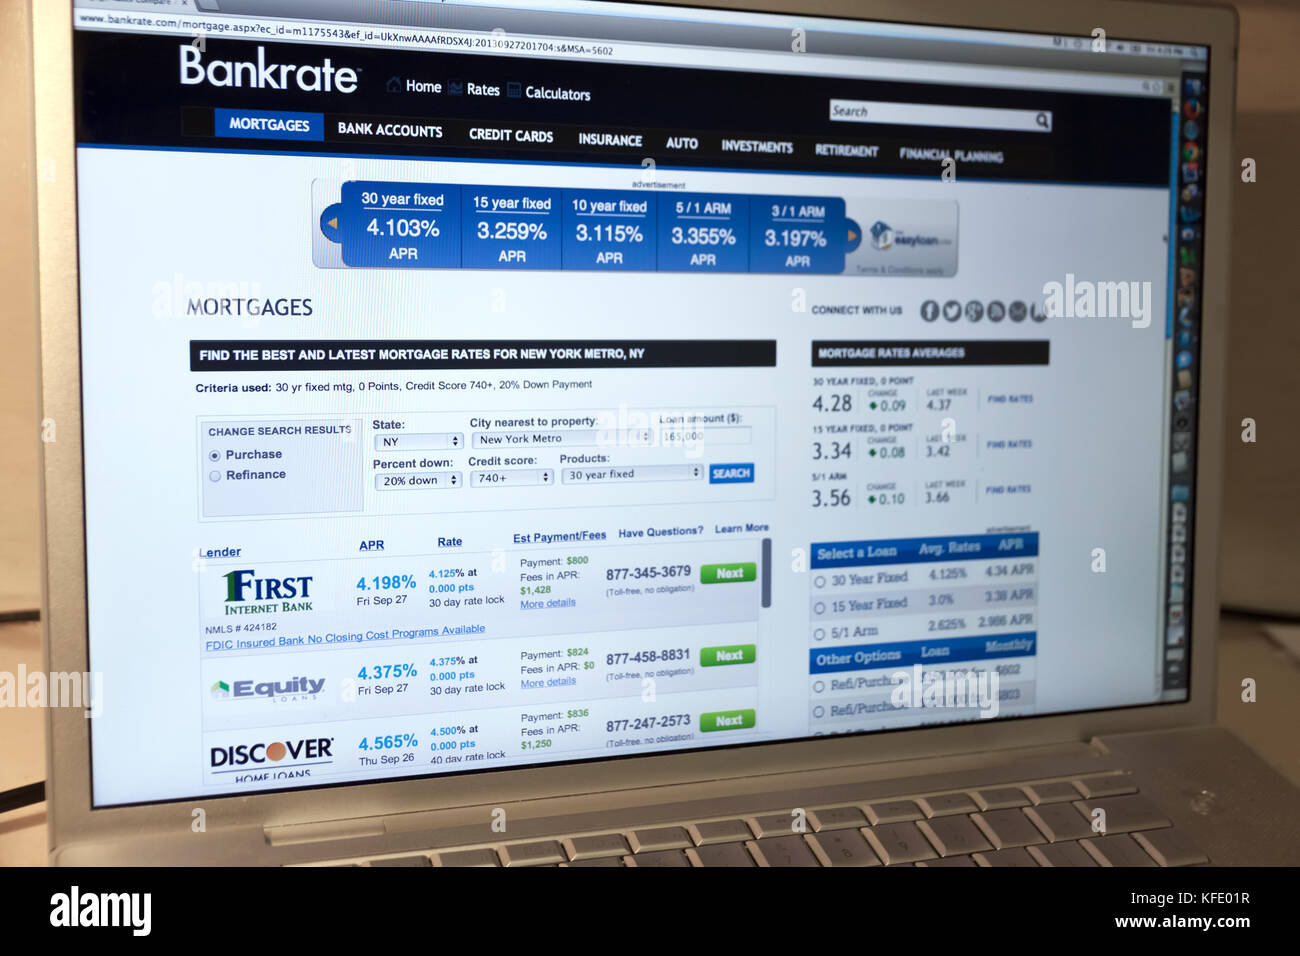 Bankrate.com is an internet website that compares various mortgage lenders' rates for the best loan prices, among other financial products. Stock Photo